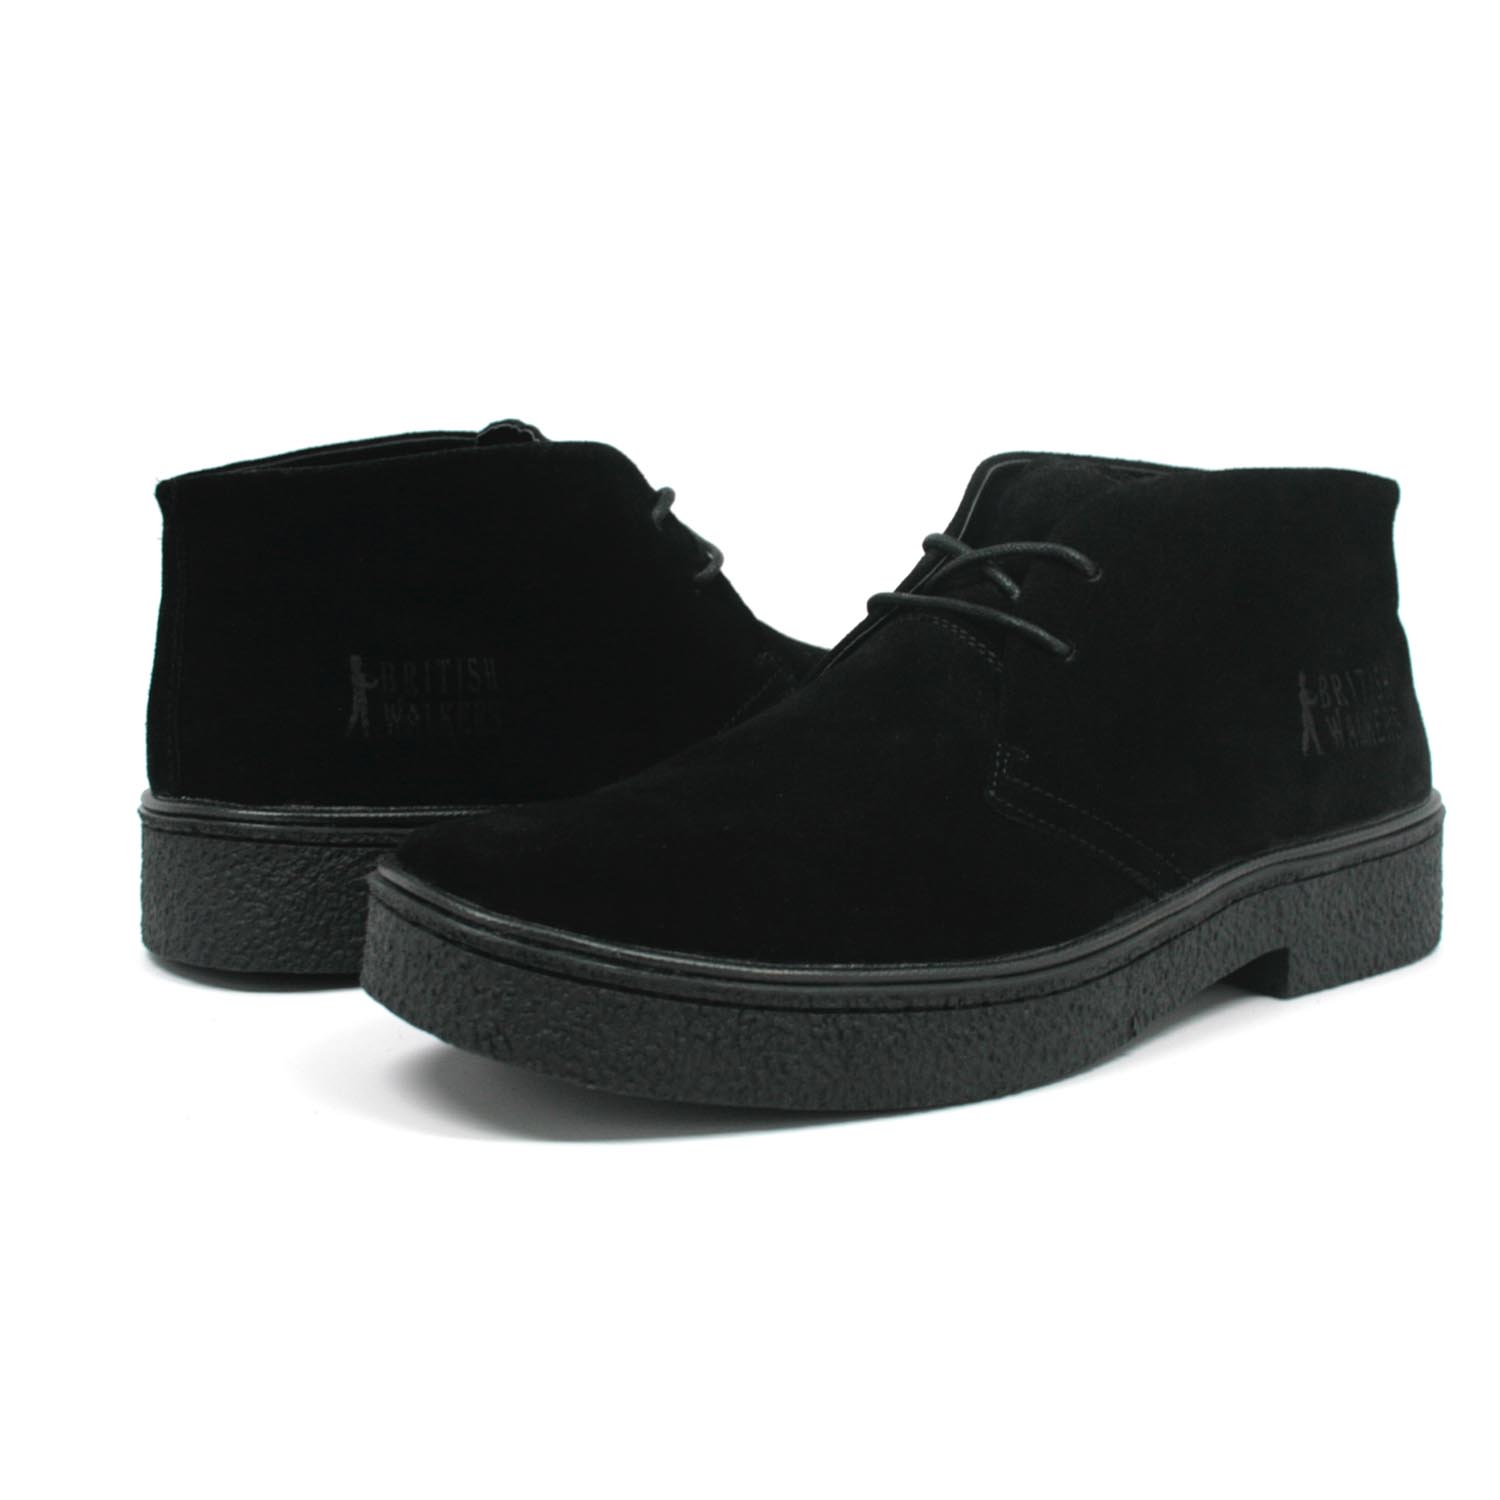 black suede chukka boots